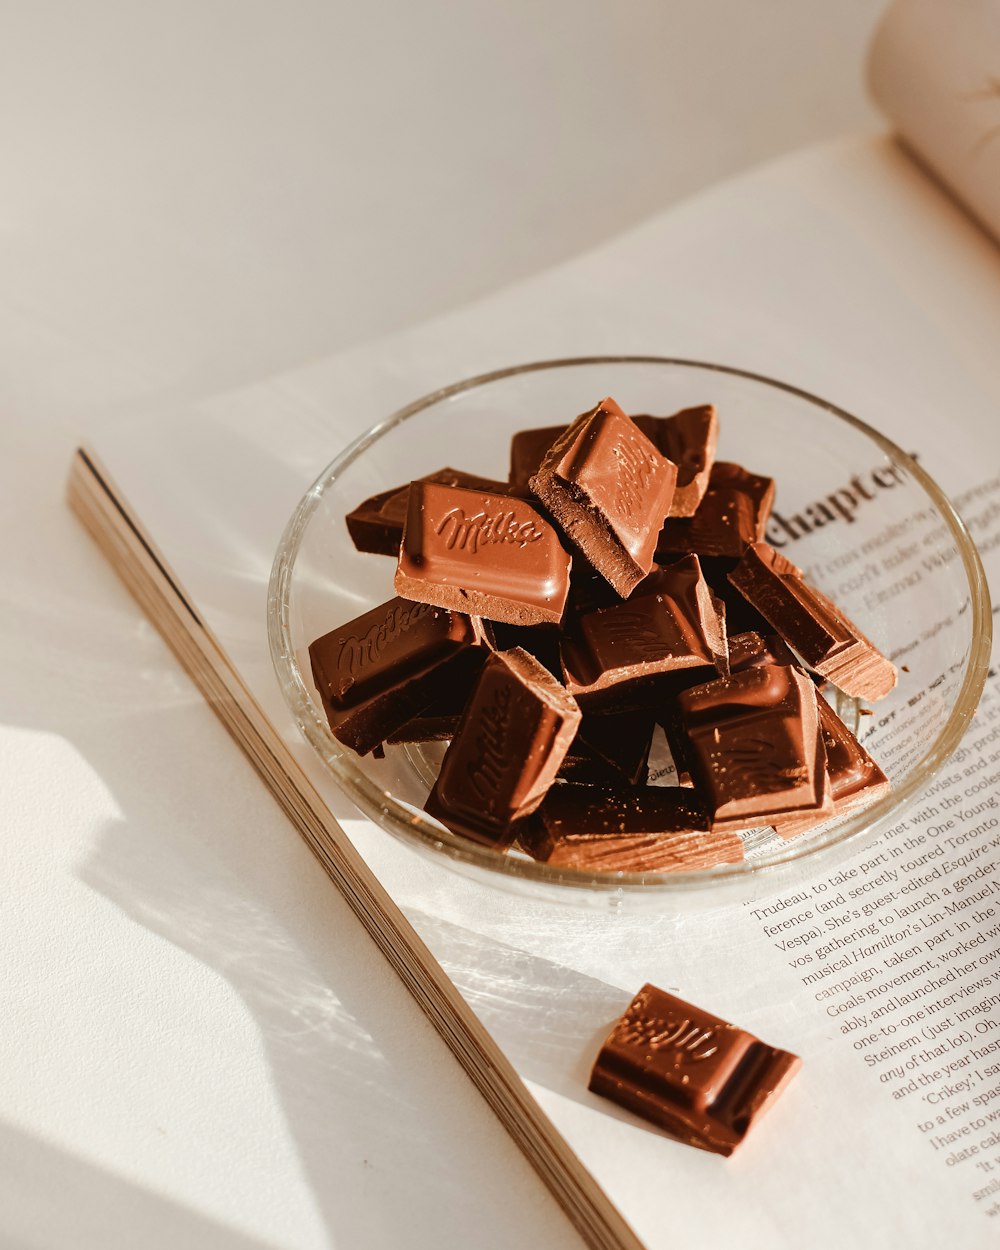 a glass plate filled with chocolate next to an open book